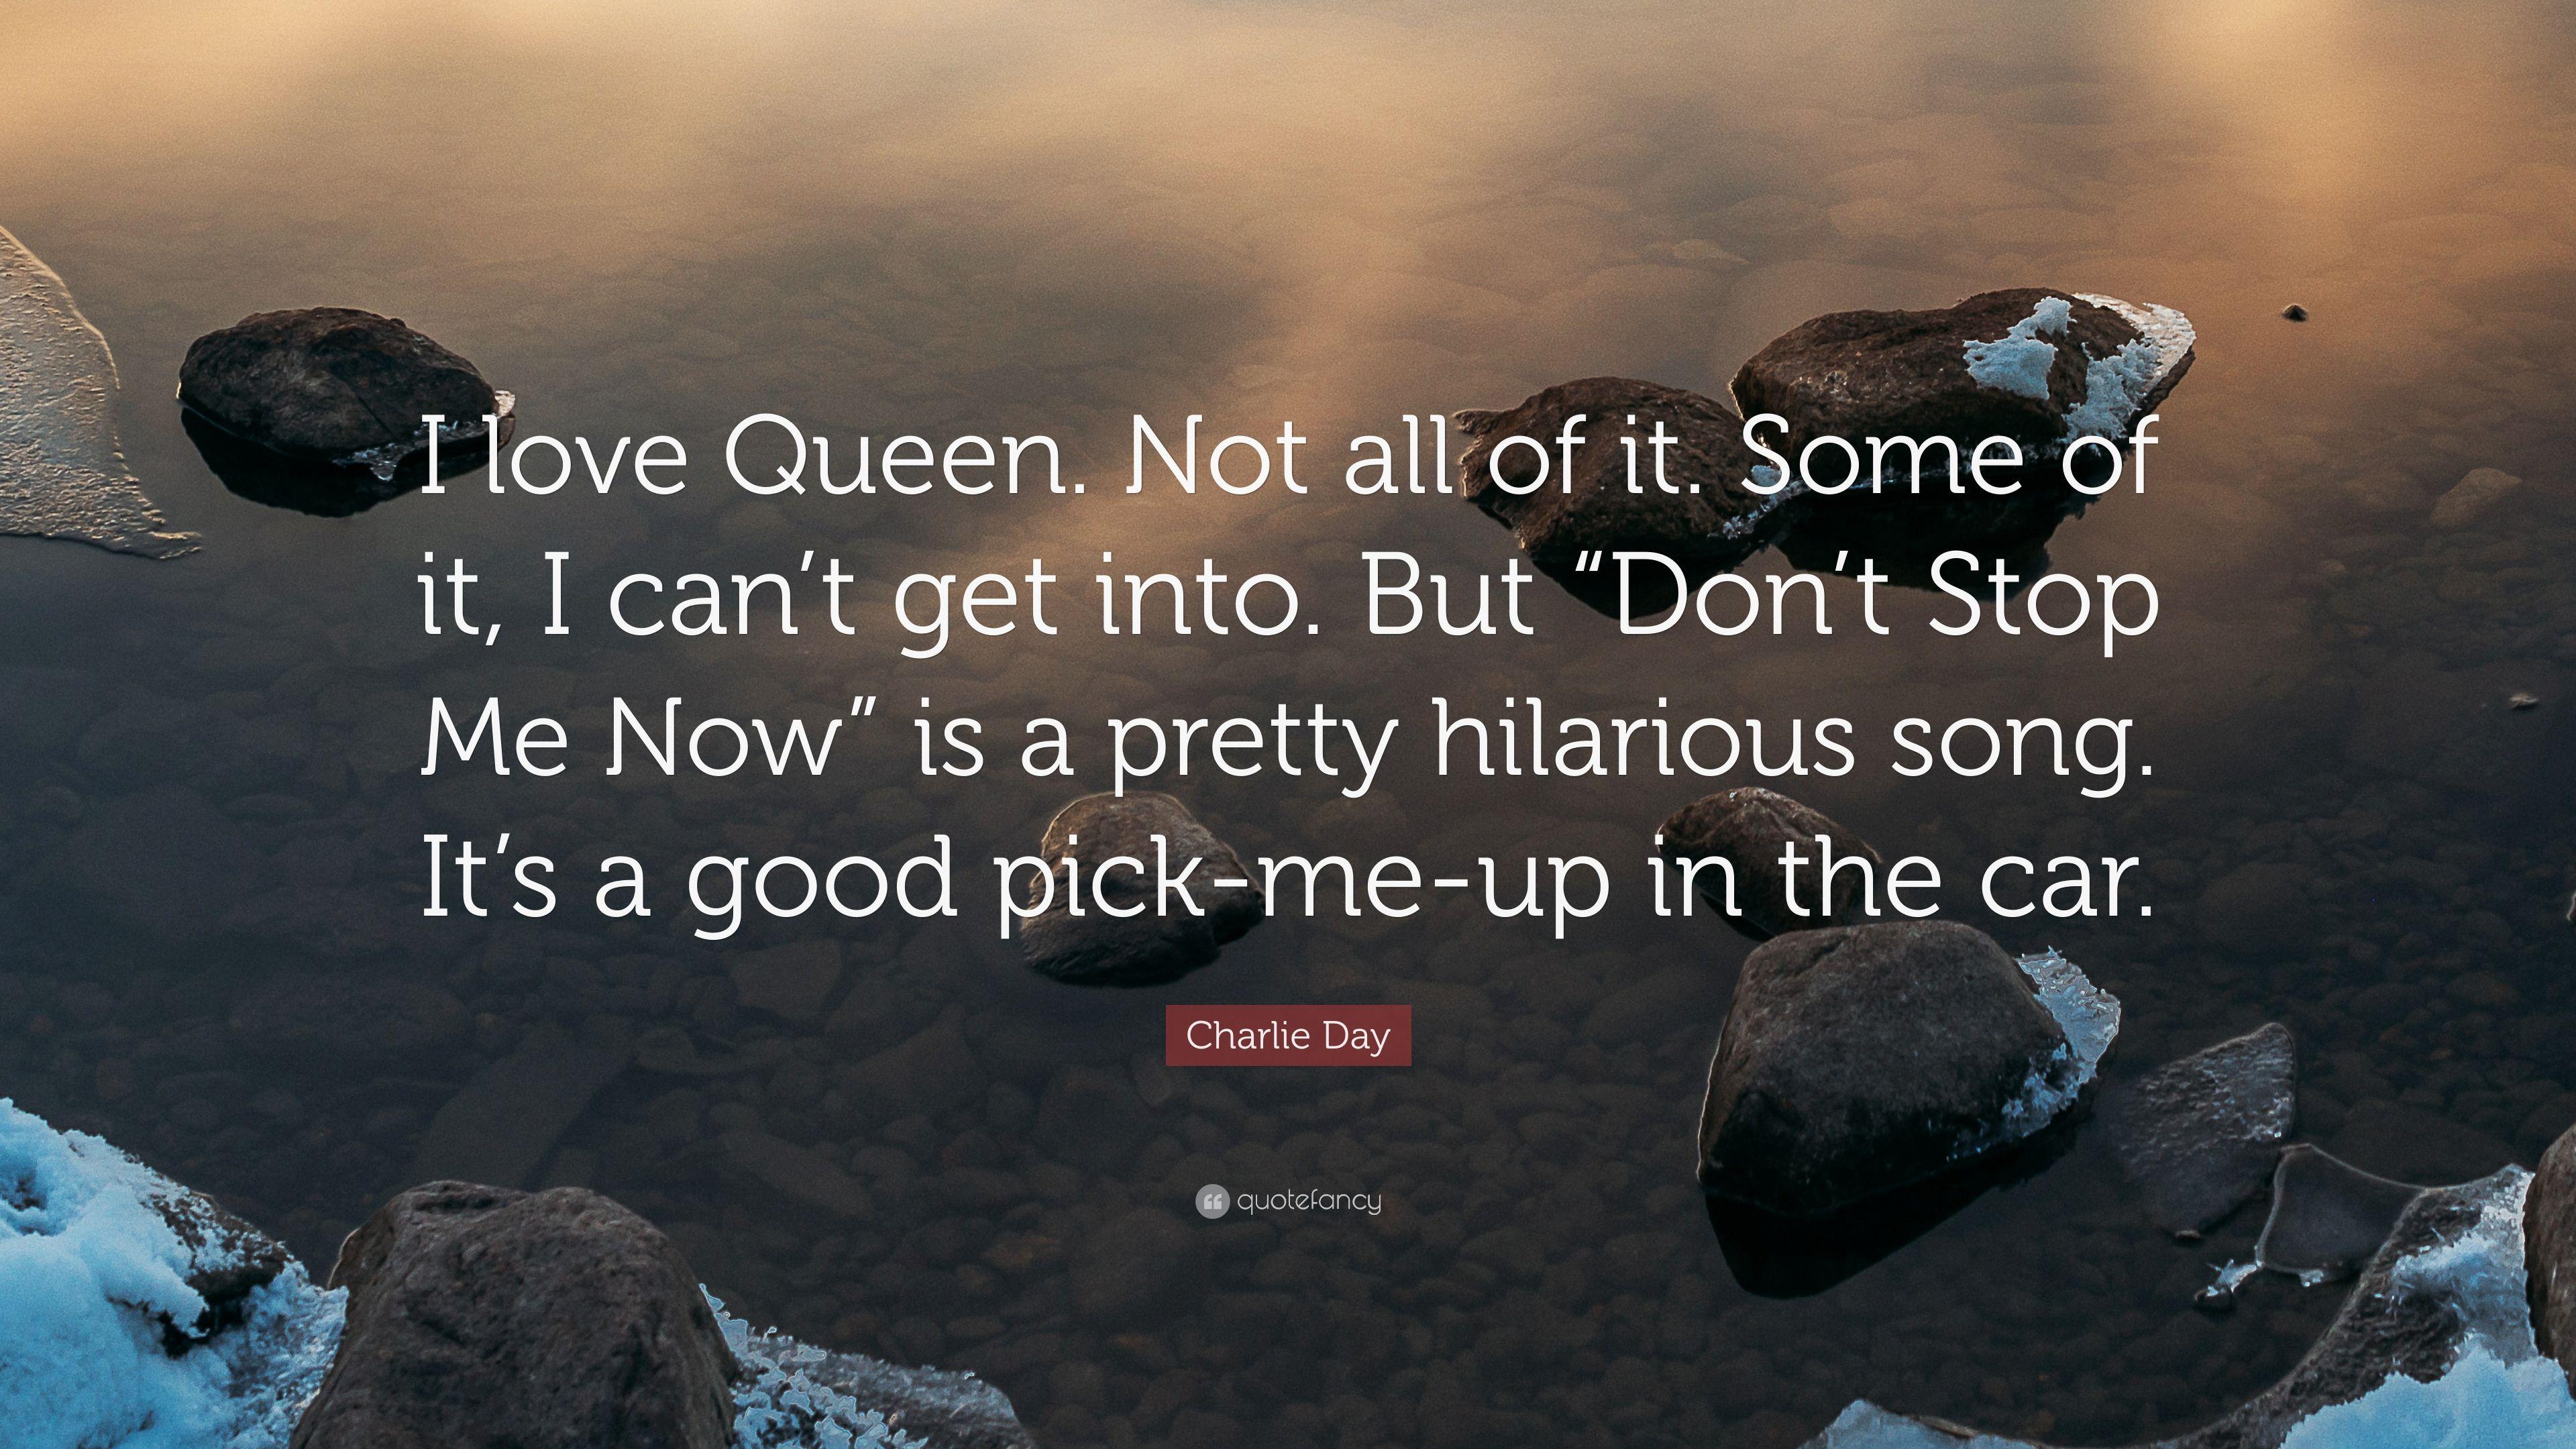 Charlie Day Quote: “I love Queen. Not all of it. Some of it, I can't